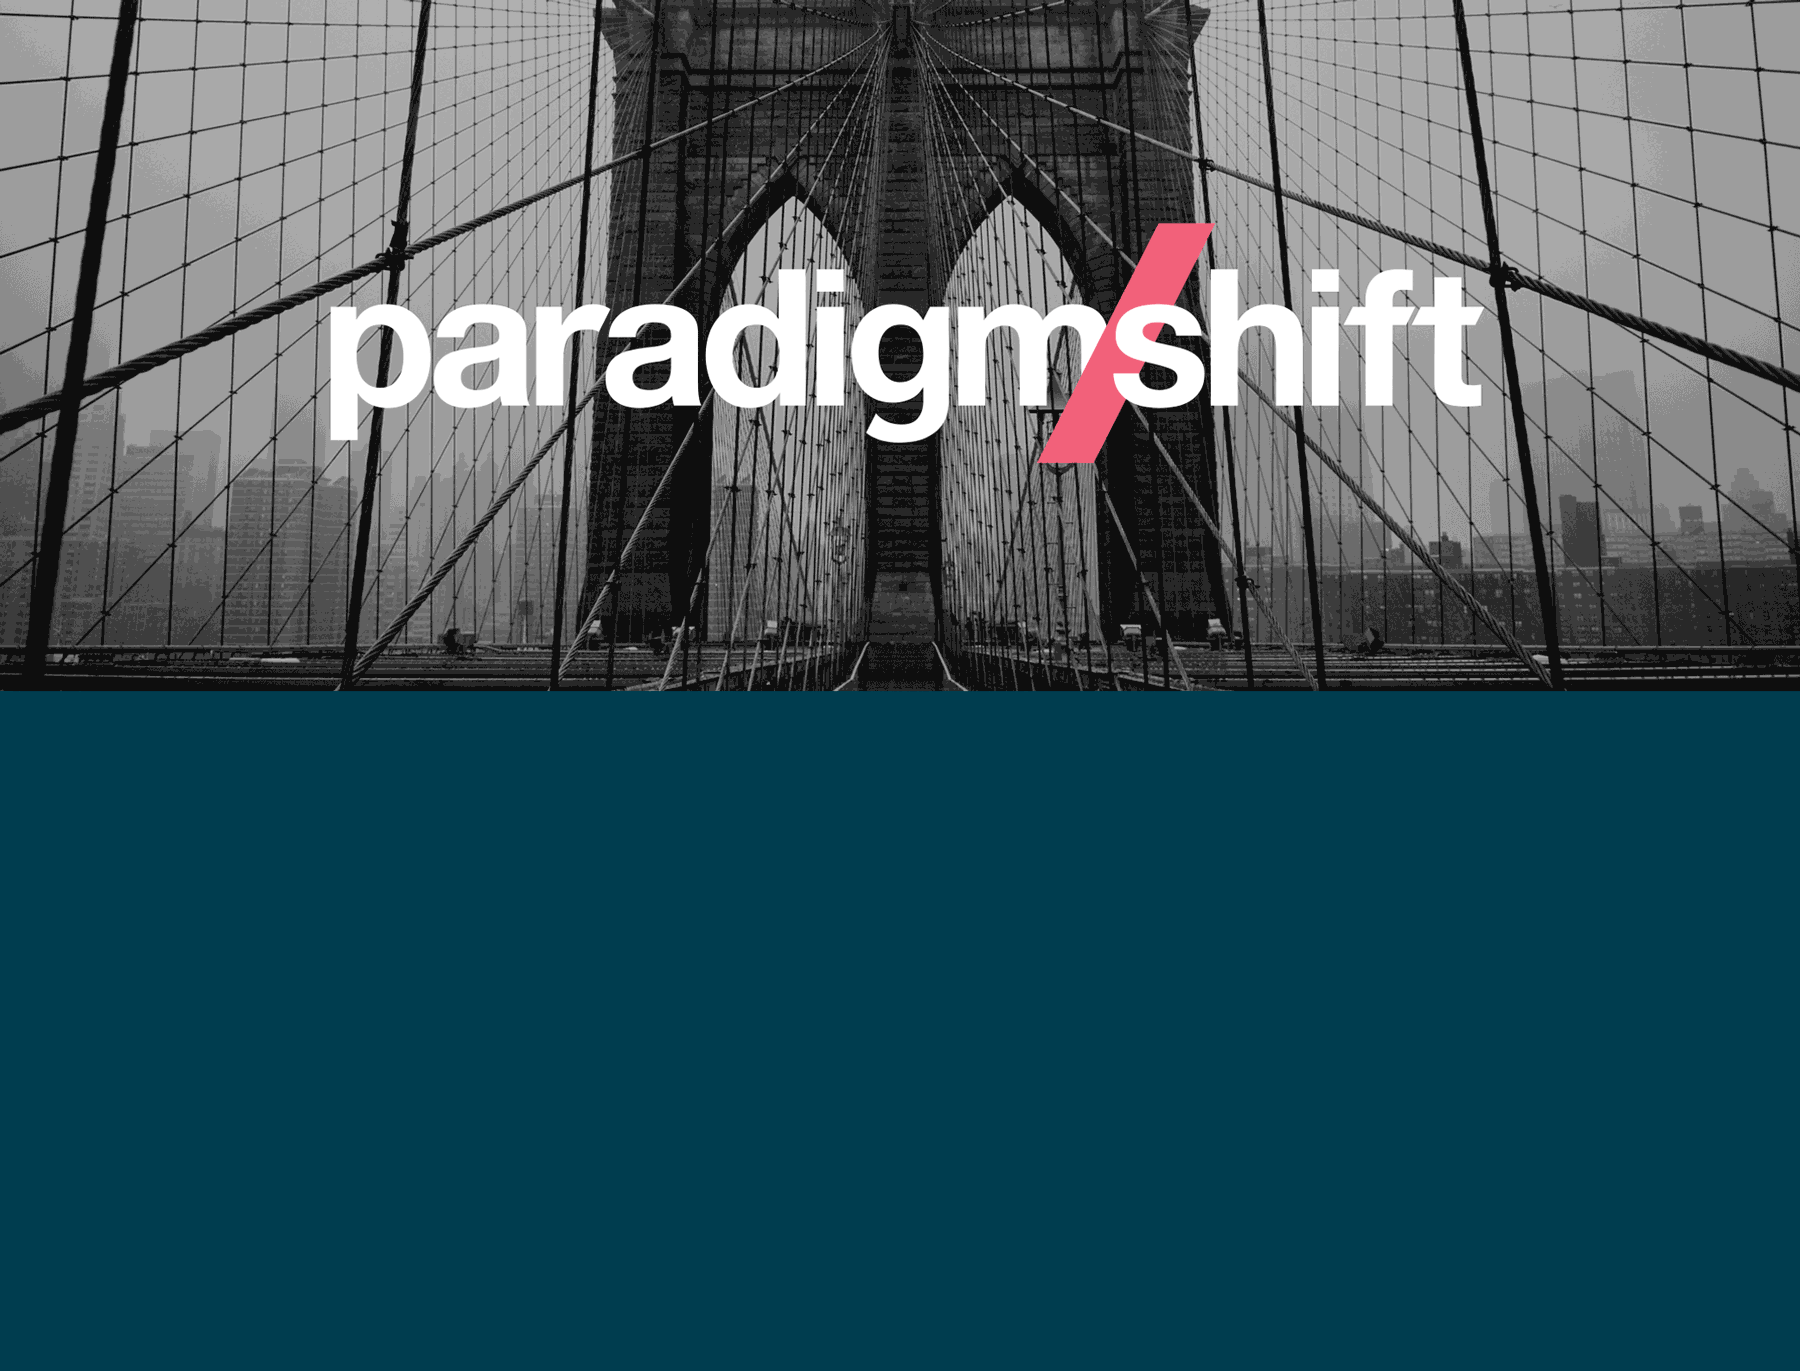 ParadigmShift logo with a background image of the Brooklyn Bridge. Next to that is a tangram puzzle with a headline featuring the theme for 2022: The power of togetherness